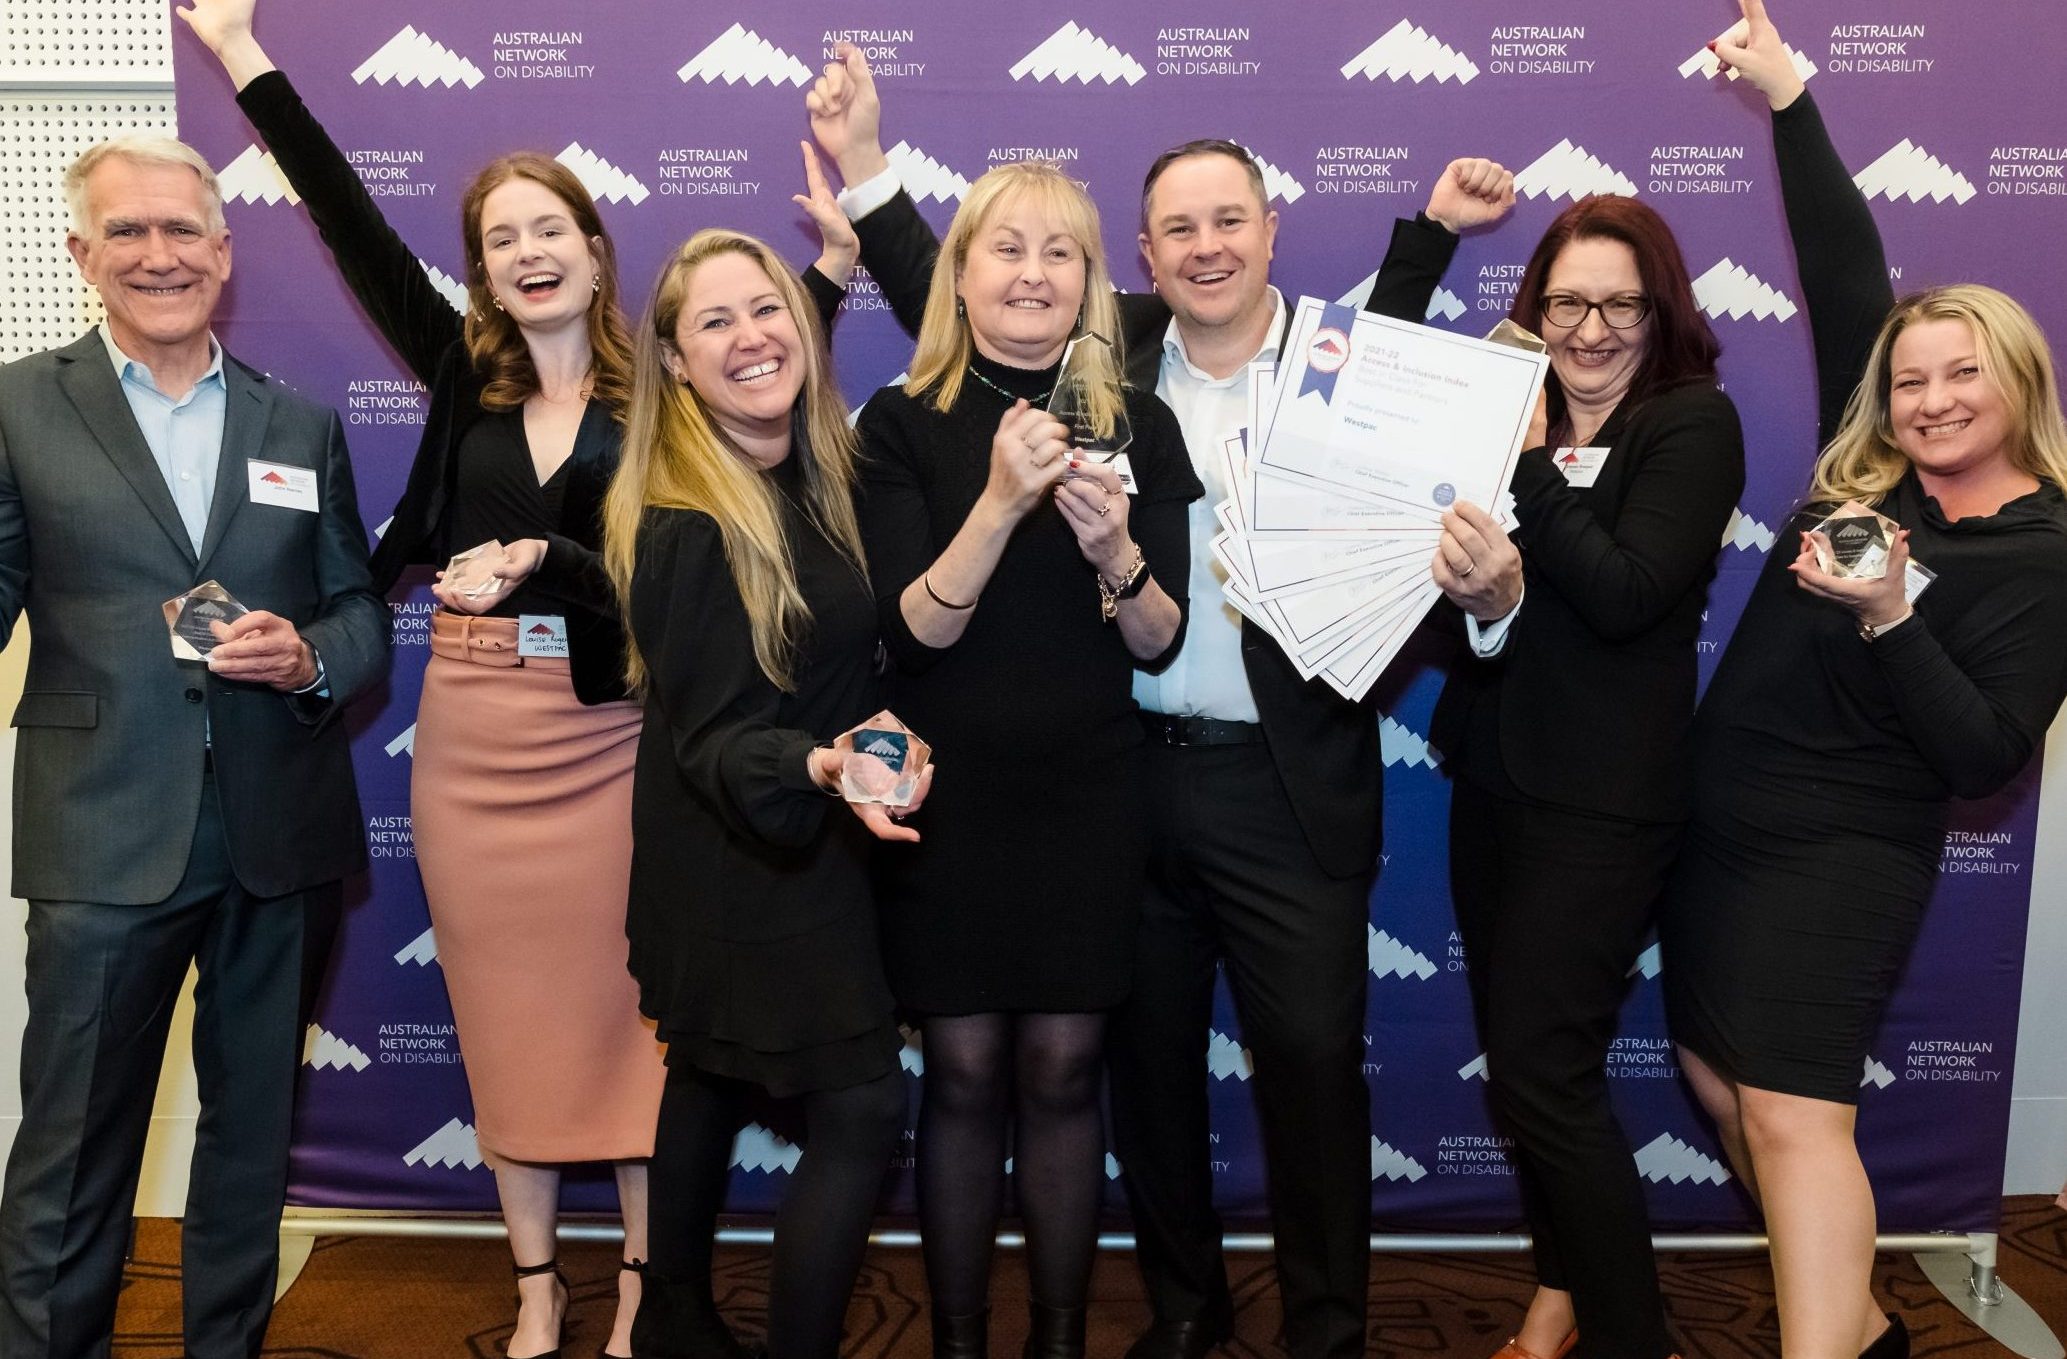 Group of seven people standing holding certificates and awards, smiling, with their hands in the air in celebration. Purple Australian Network on Disability banner behind them.